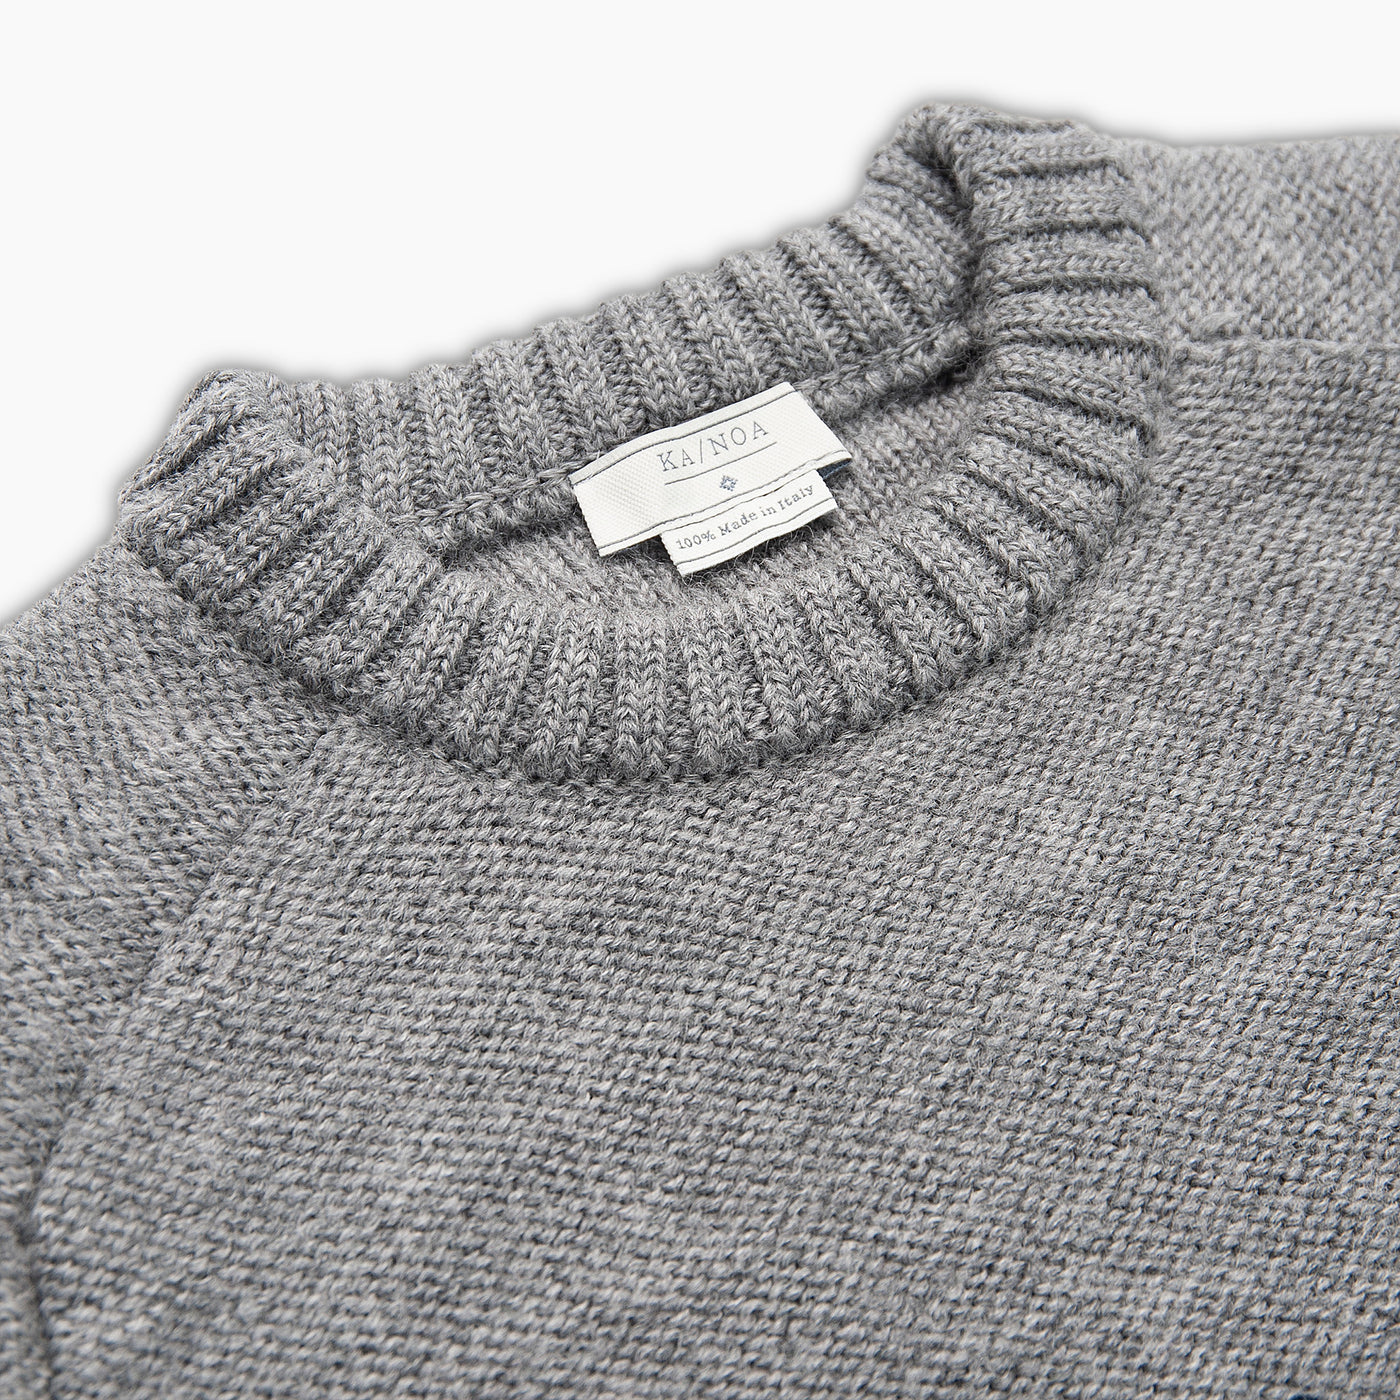 Griff knitted crewneck jumper